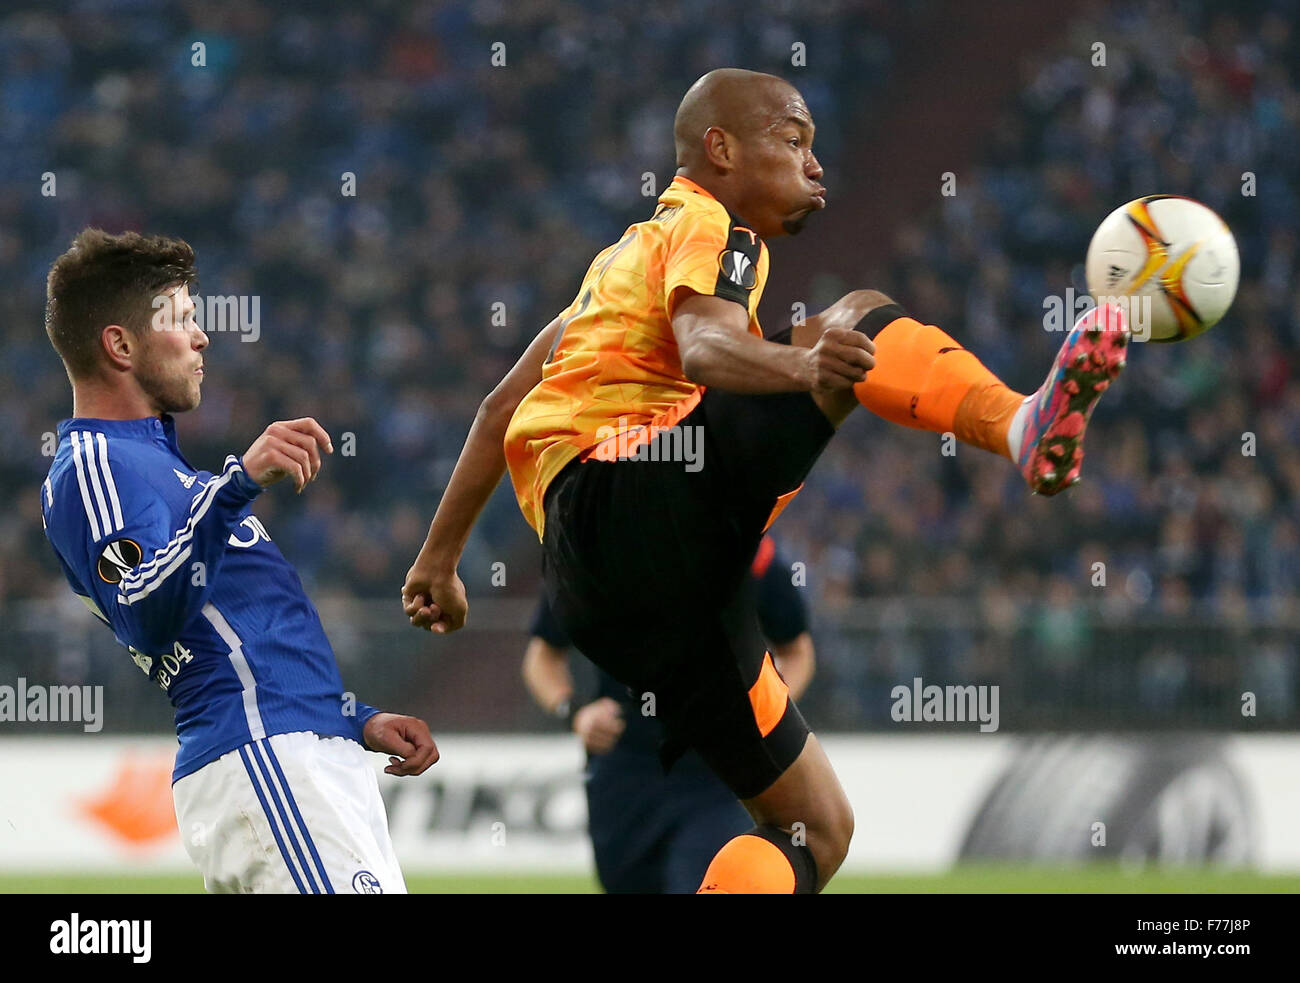 Gelsenkirchen, Germany. 26th Nov, 2015. Schalke's Klaas-Jan Huntelaar (l) and Nikosia's Joao Guilherme (r) compete for the ball during the Europa League Group K football match between FC Schalke 04 and APOEL Nikosia at the Veltins Arena in Gelsenkirchen, Germany, 26 November 2015. PHOTO: FRISO GENTSCH/DPA/Alamy Live News Stock Photo